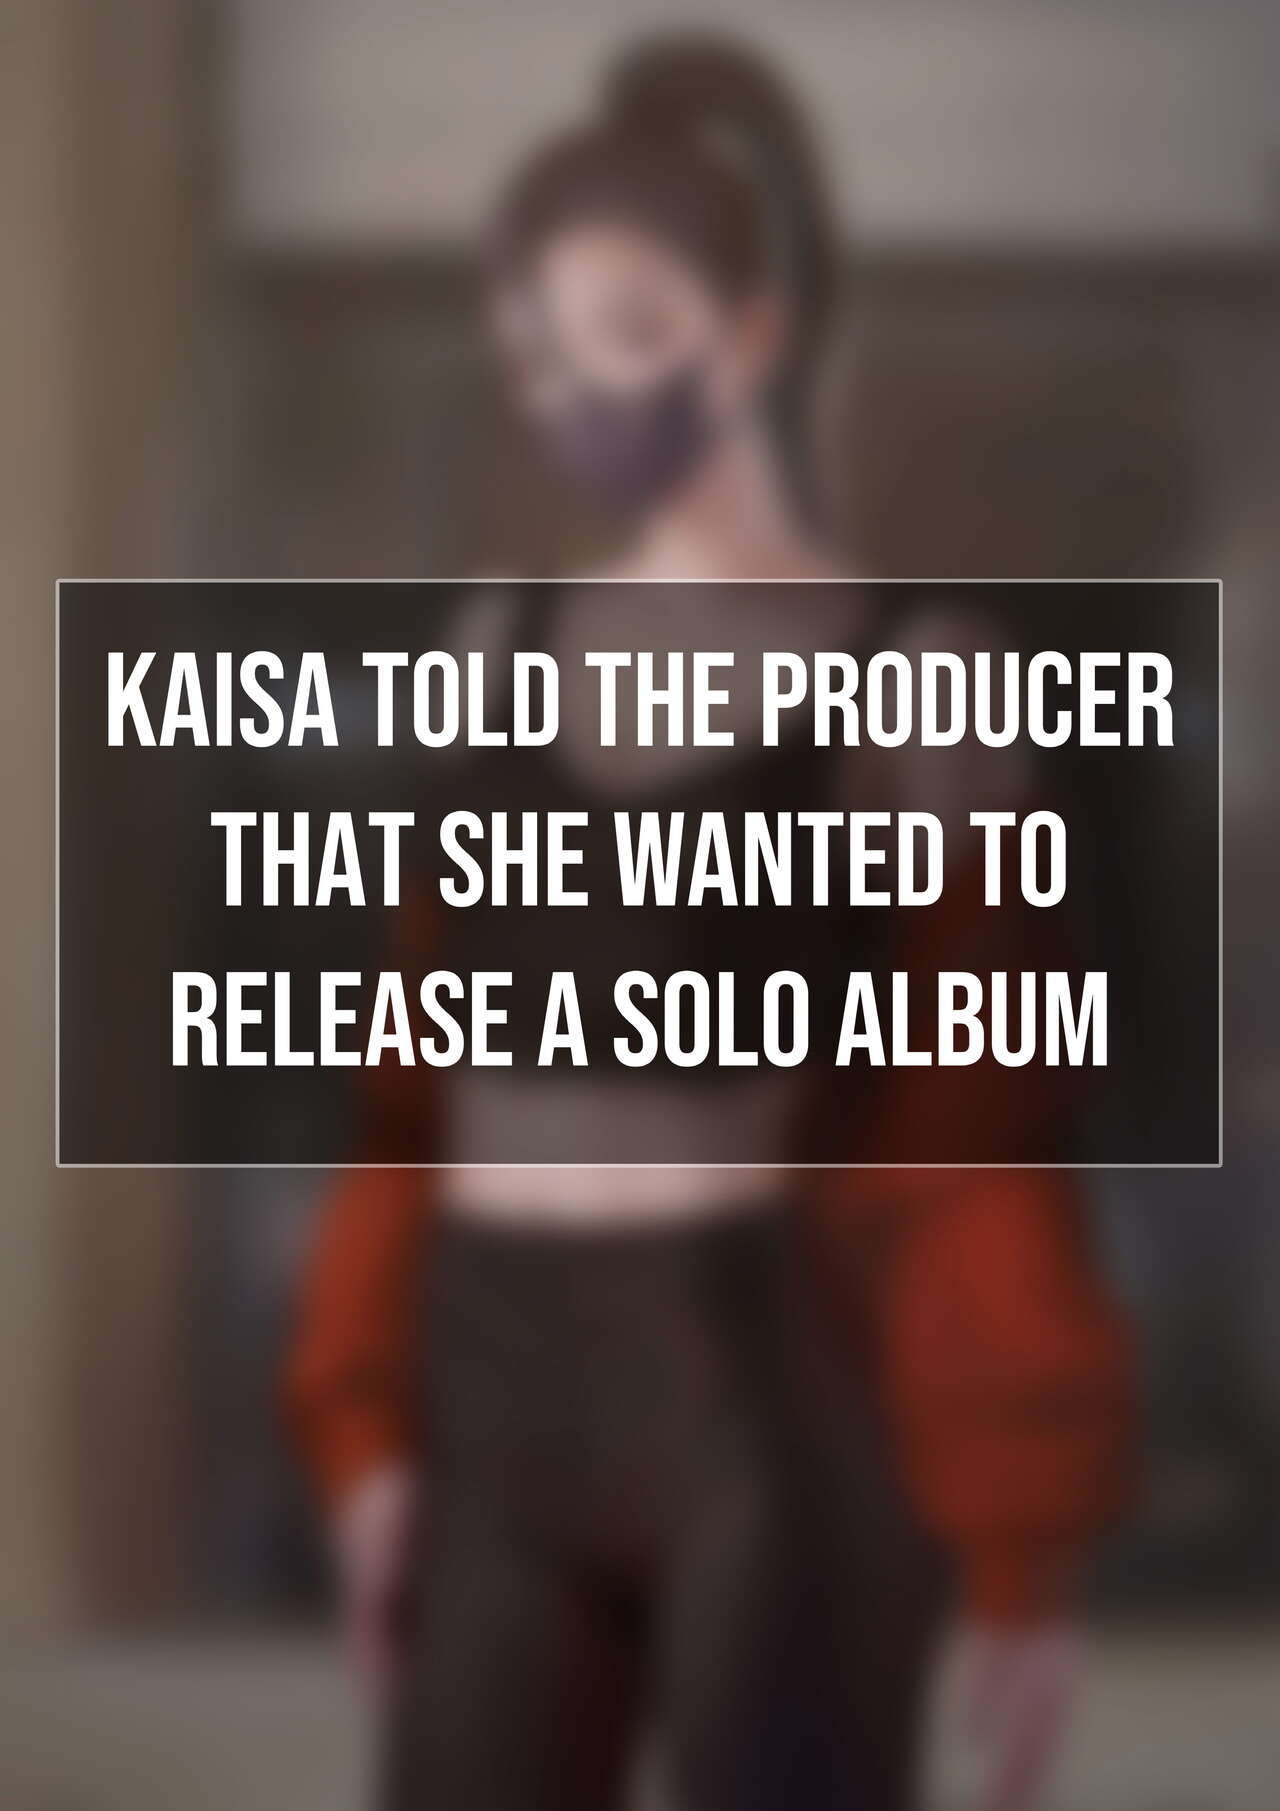 She Solo Porn - Kaisa Told The Producer That She Wanted To Release A Solo Album comic porn  - HD Porn Comics